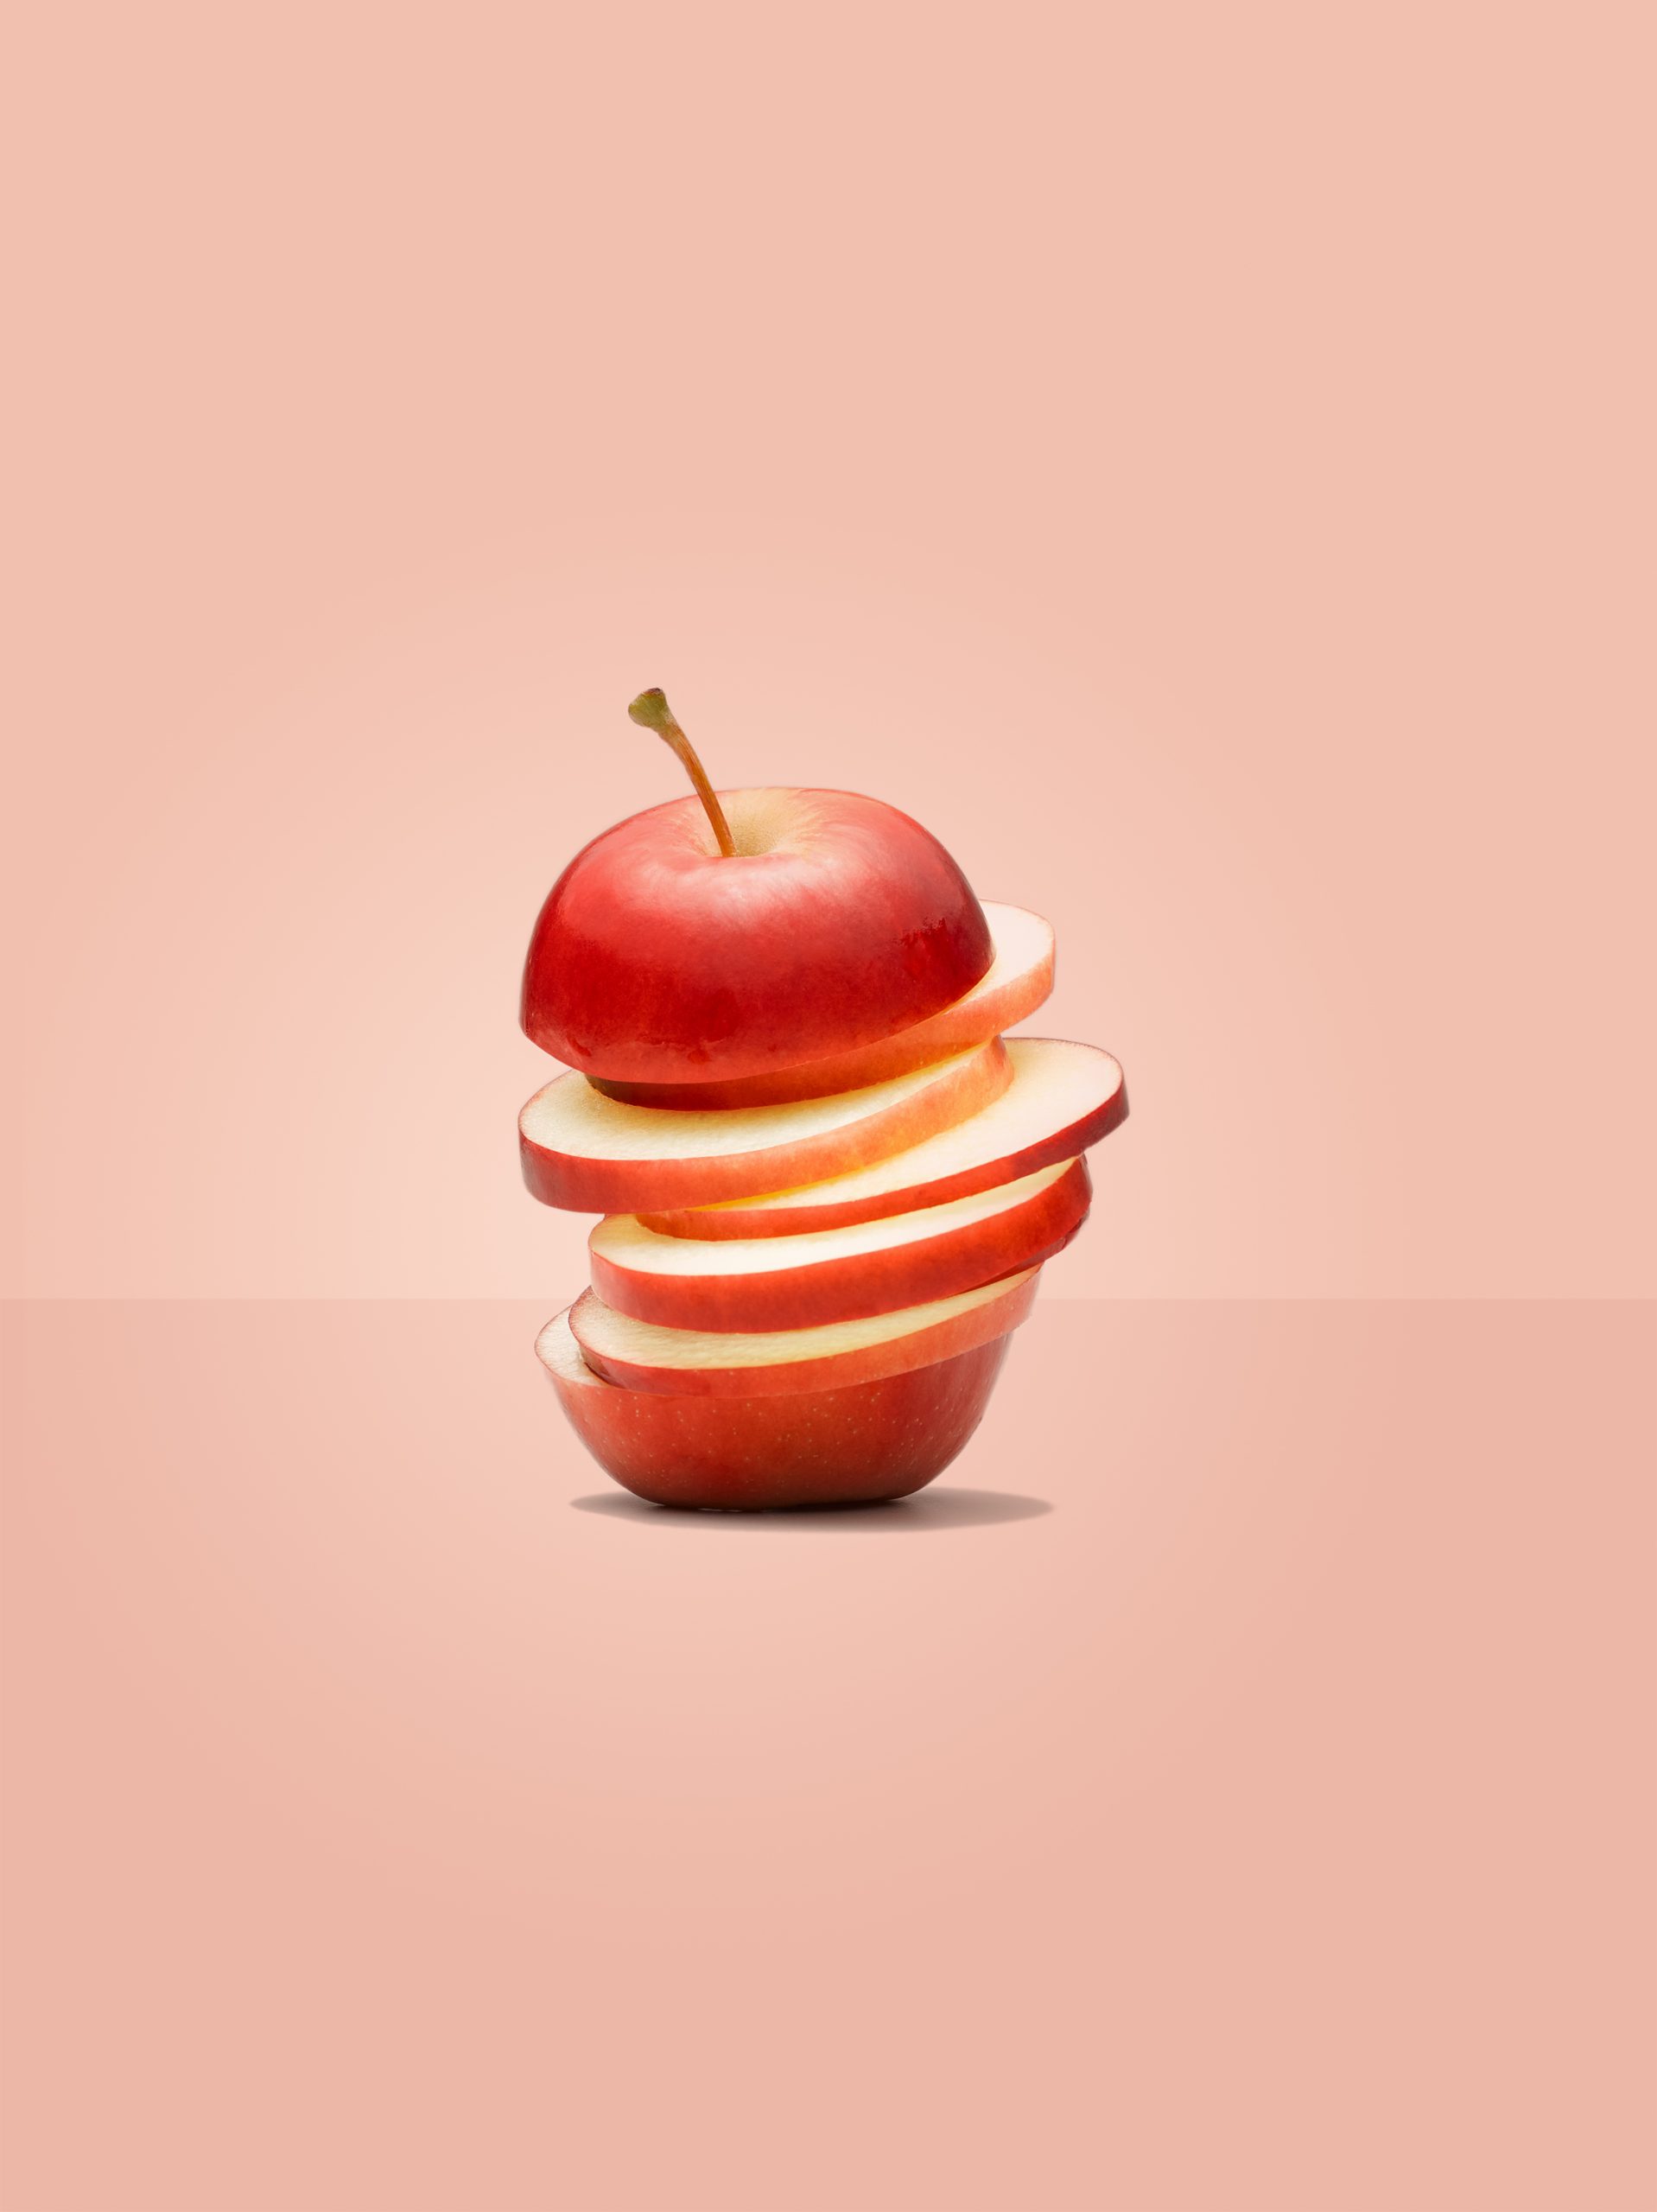 One Rockit apple sliced into multiple slices, stacked on top of each other.